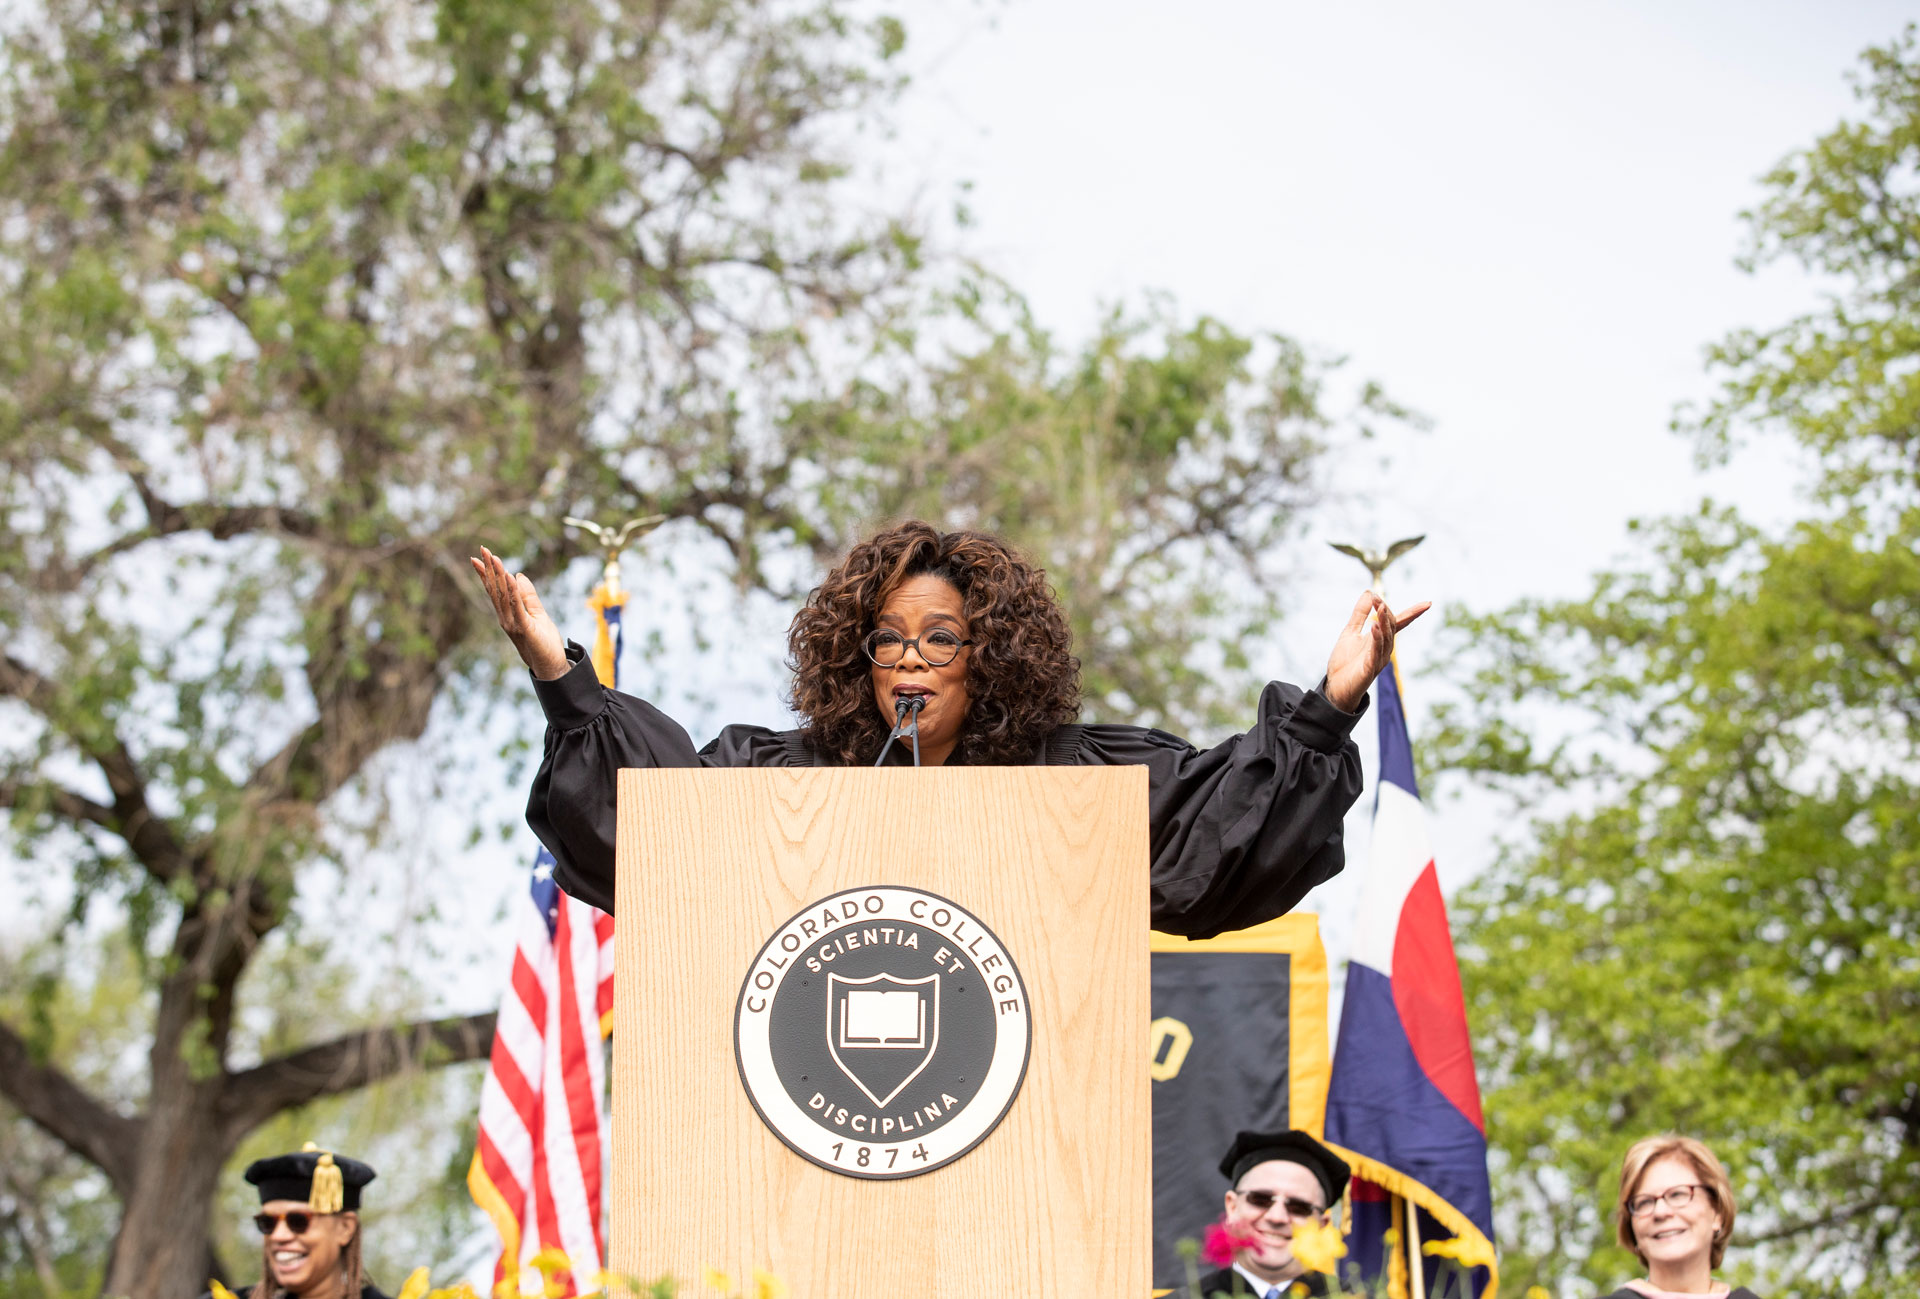 Oprah Winfrey, the 2019 commencement speaker, repeats her mantra "Everything is always working out for me" during her speech and before handing out her latest book "The Path Made Clear" to each student. Winfrey was also an honorary degree recipient.